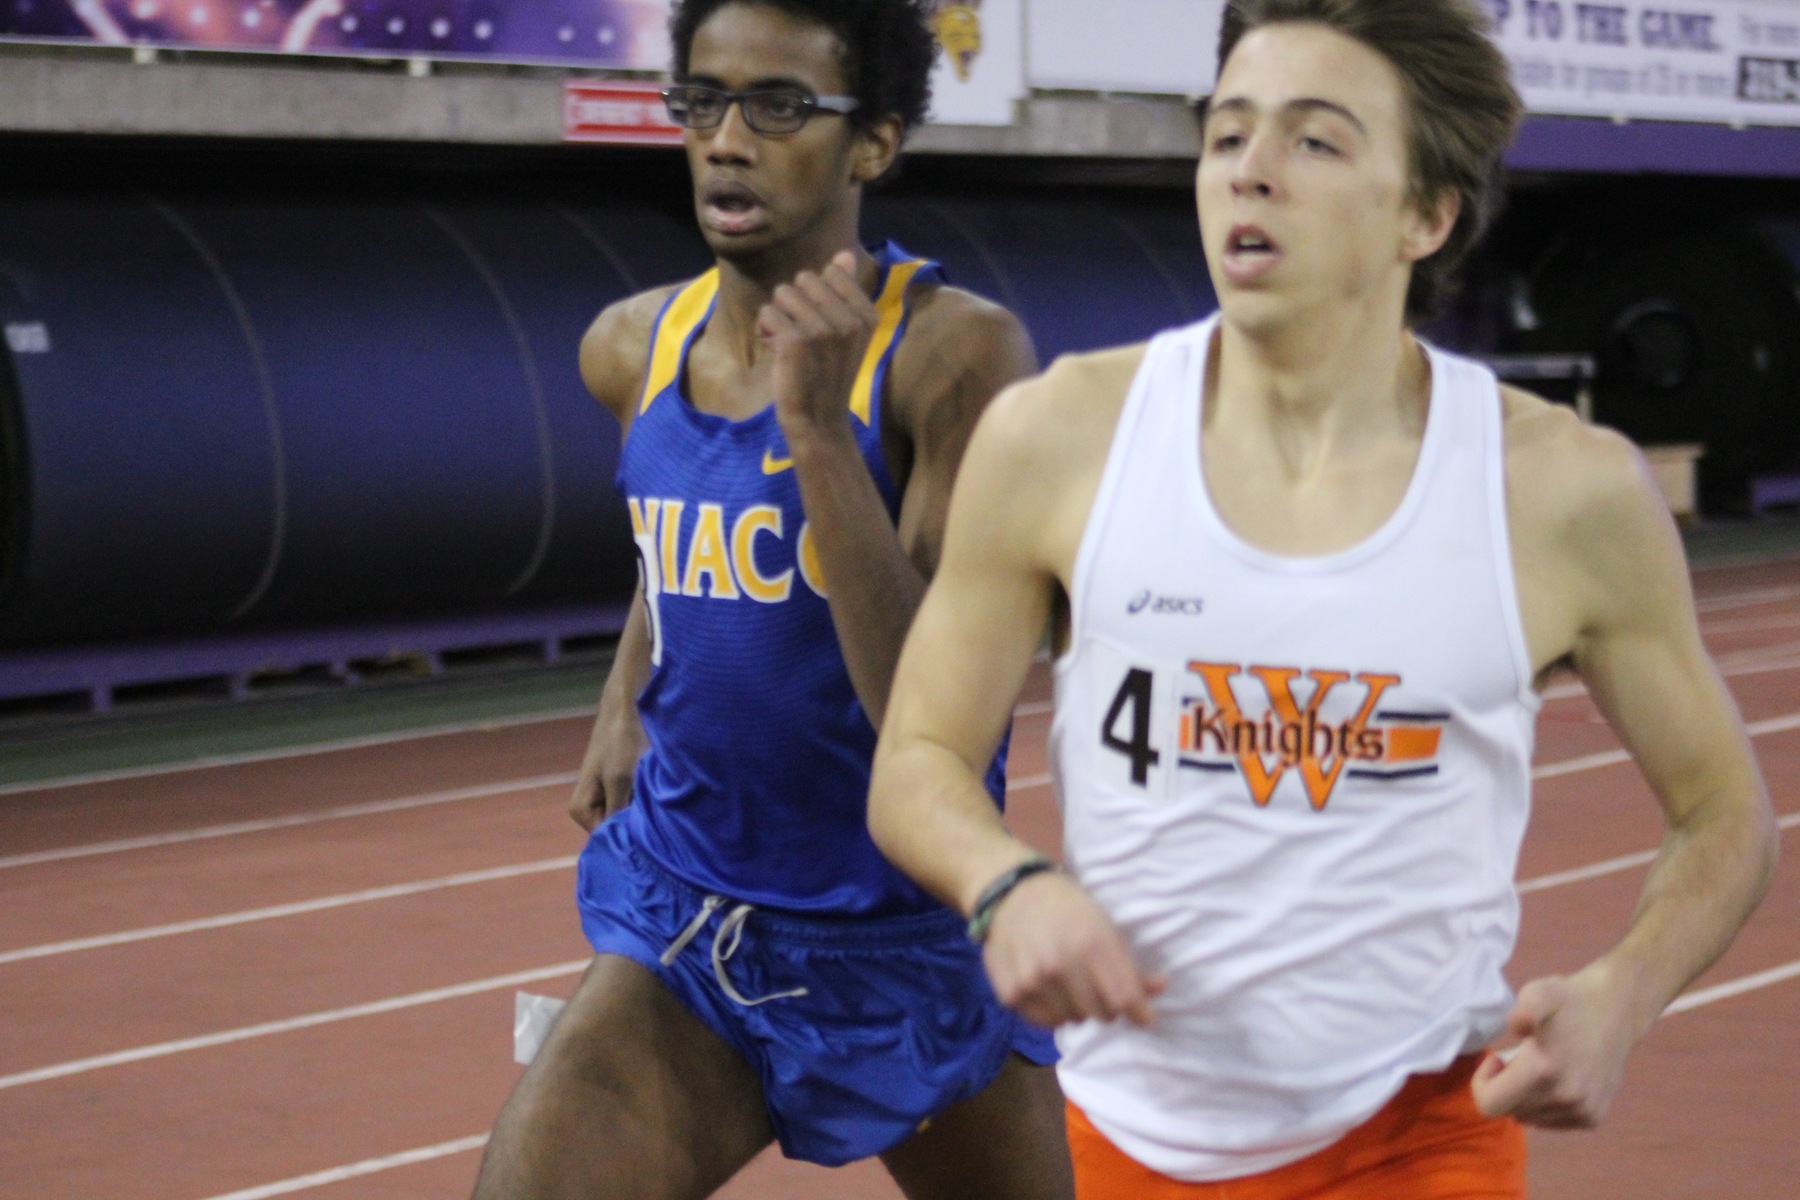 NIACC's Abiaziz Wako runs to a ninth-place finish at the Jack Jennett Open on Friday.